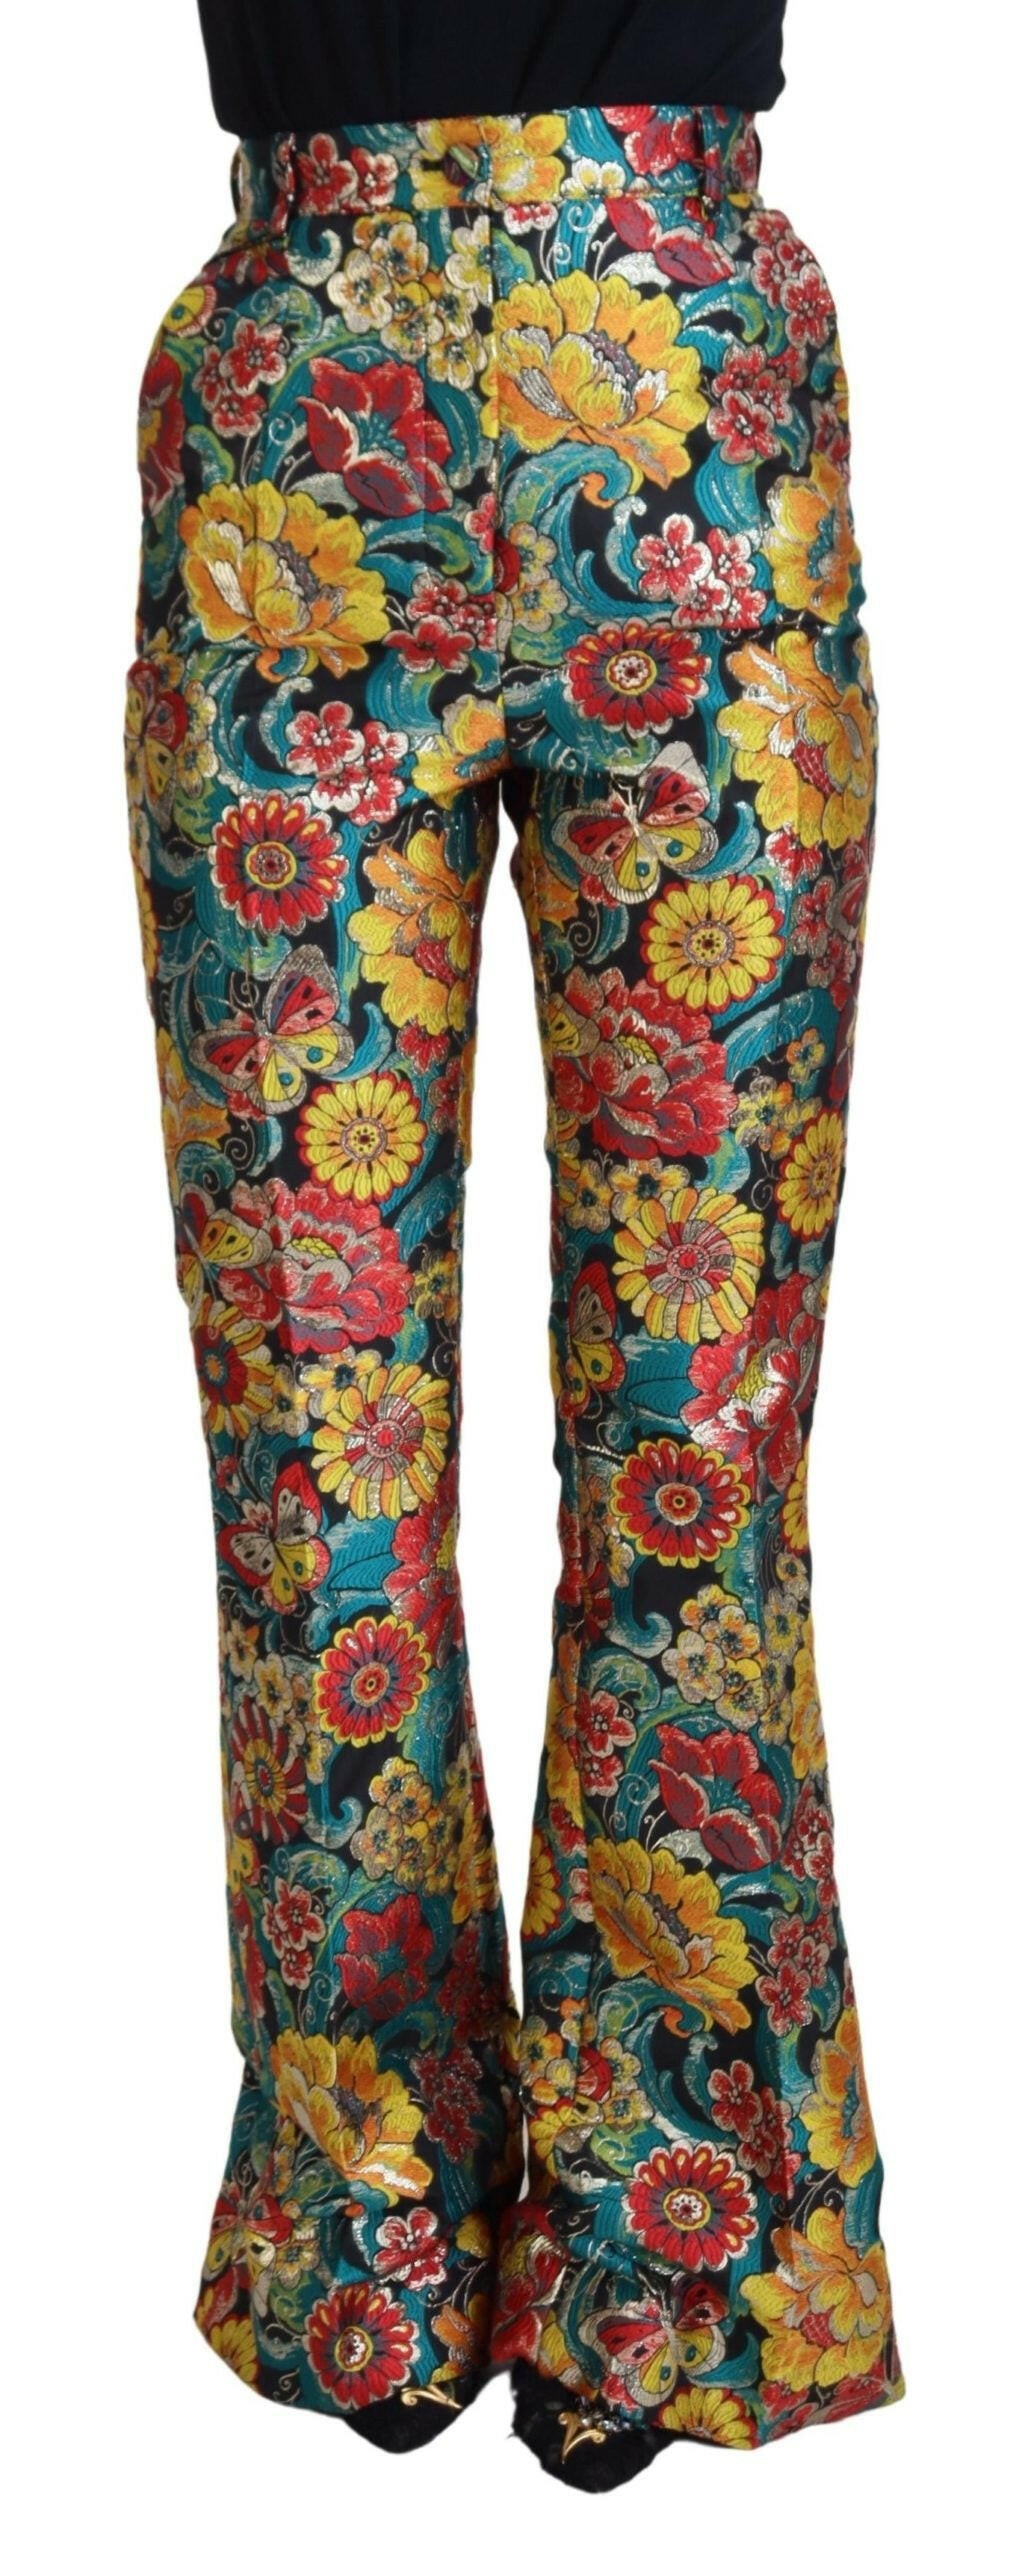 Dolce & Gabbana Multicolor Floral Women Flared Pants - GENUINE AUTHENTIC BRAND LLC  